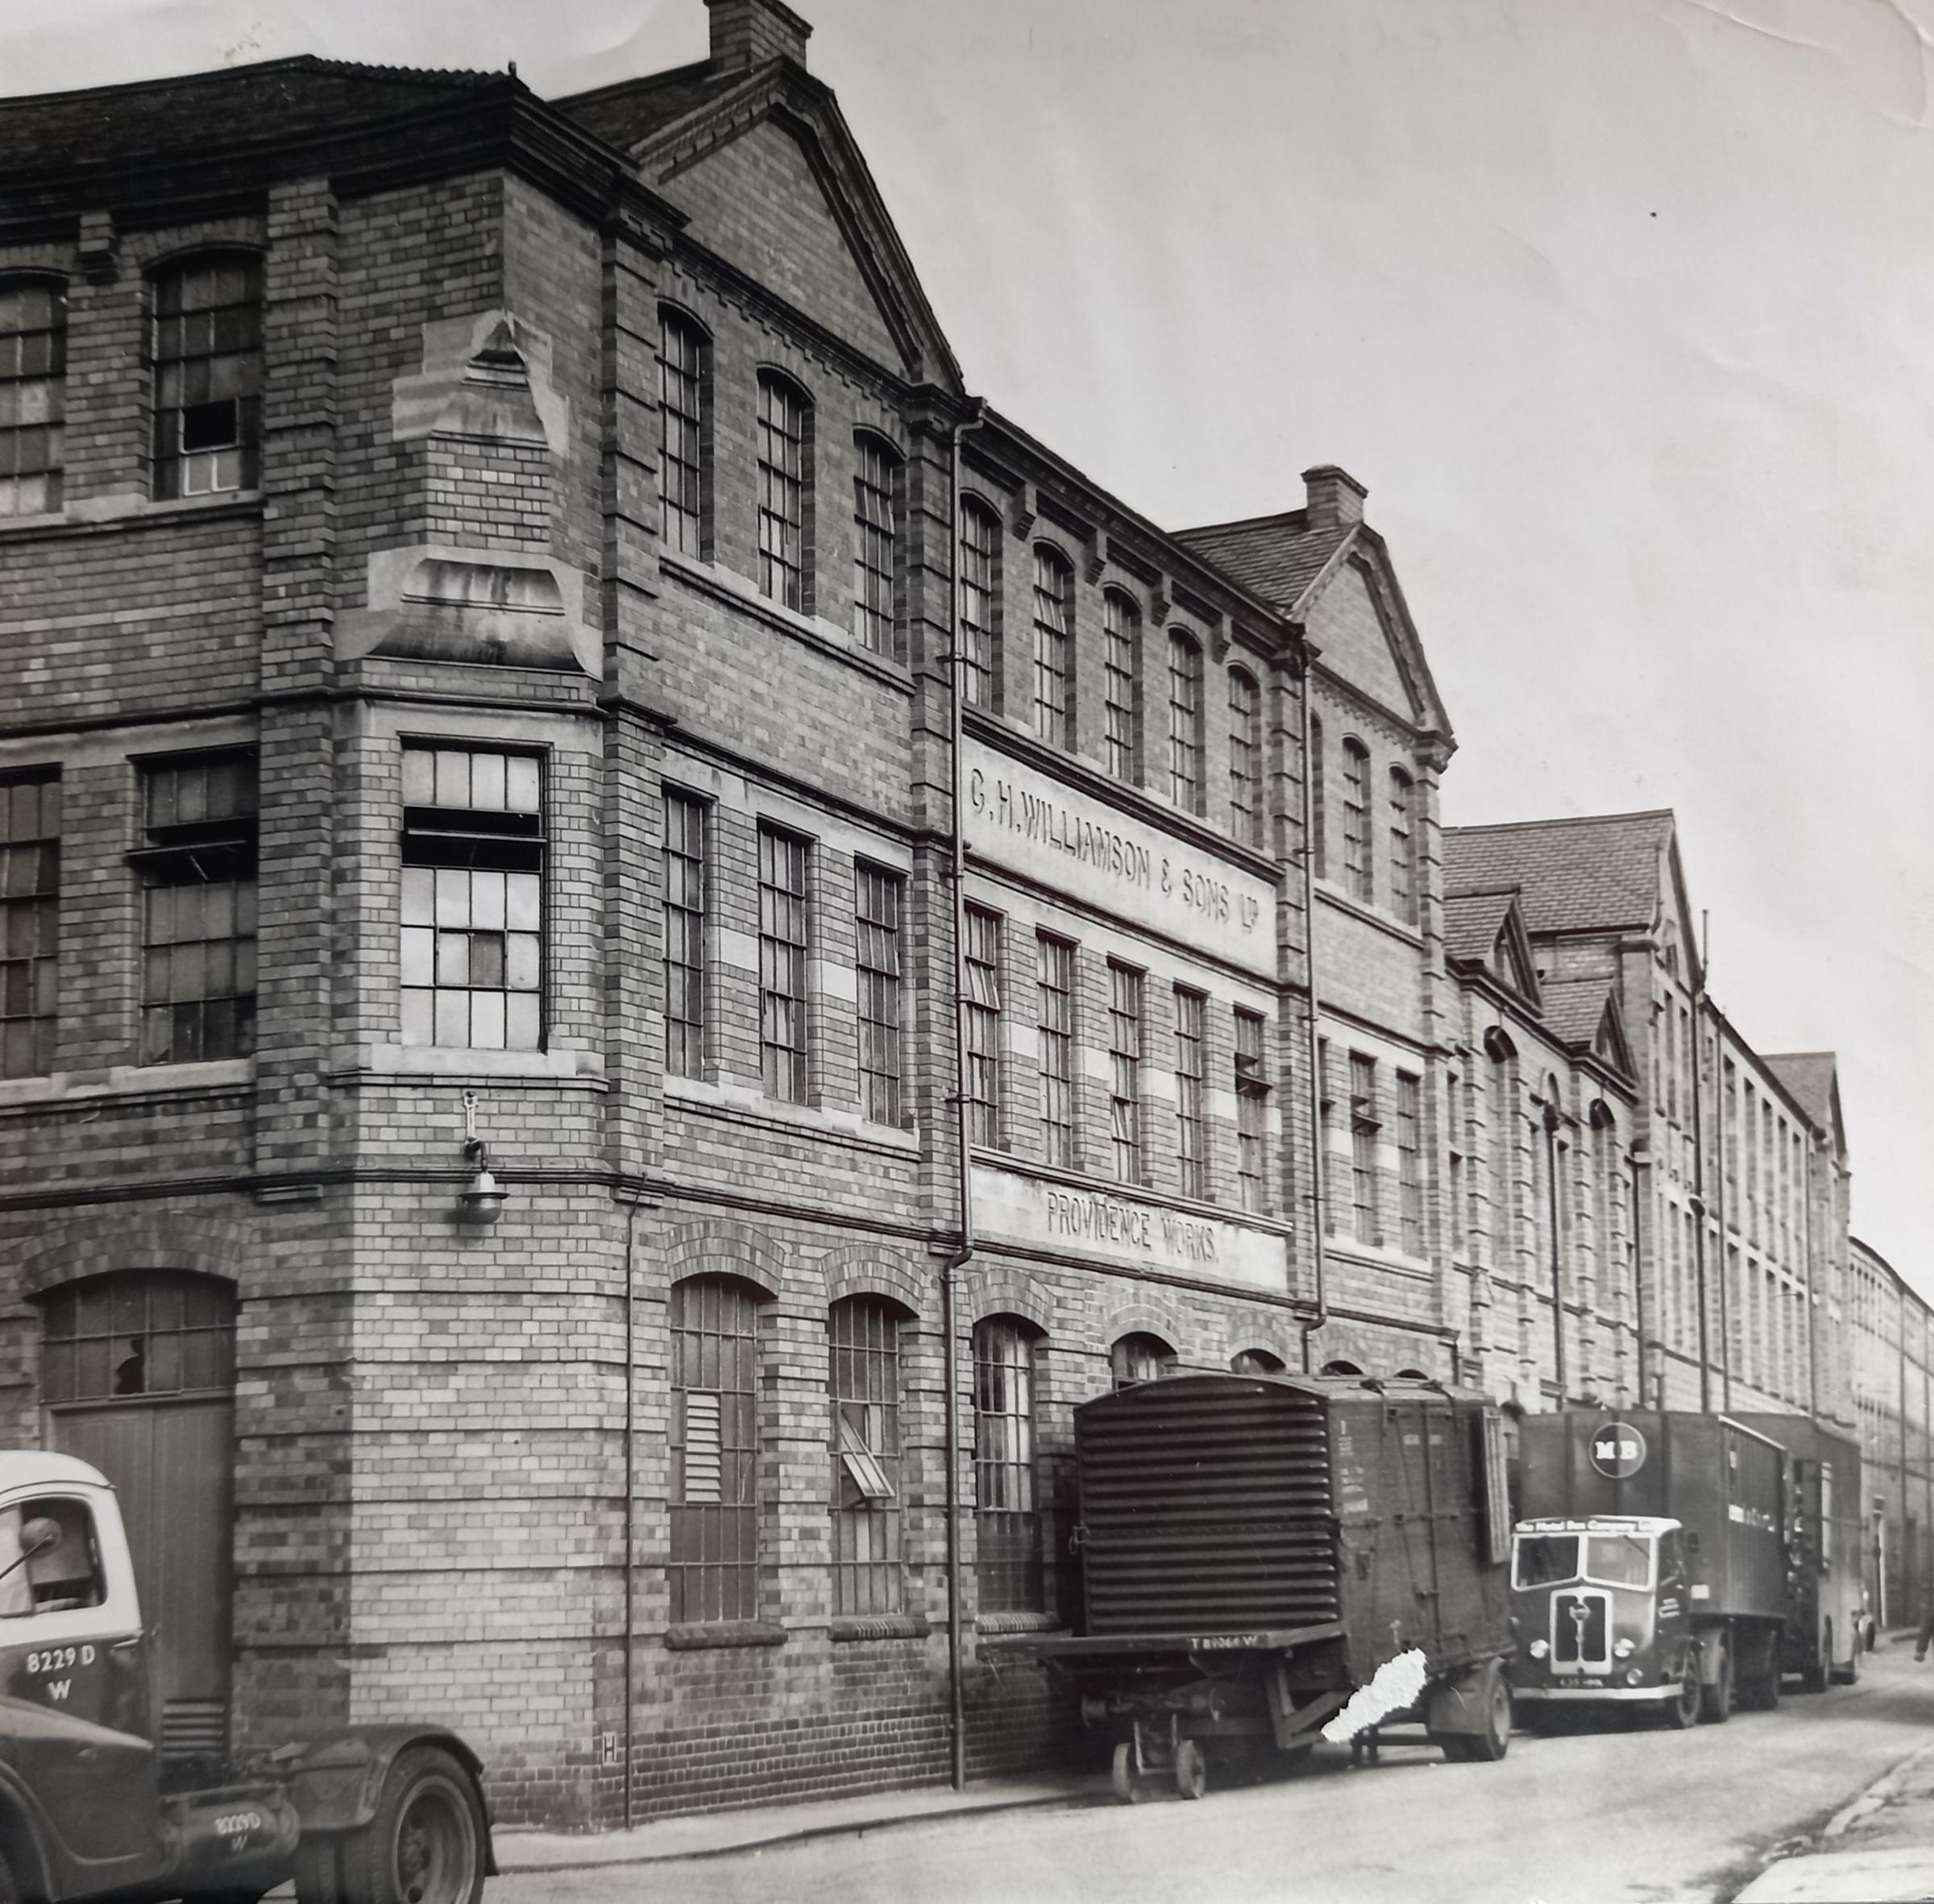 The original factory of GH Williamson in Charles Street, Worcester, pictured in 1967